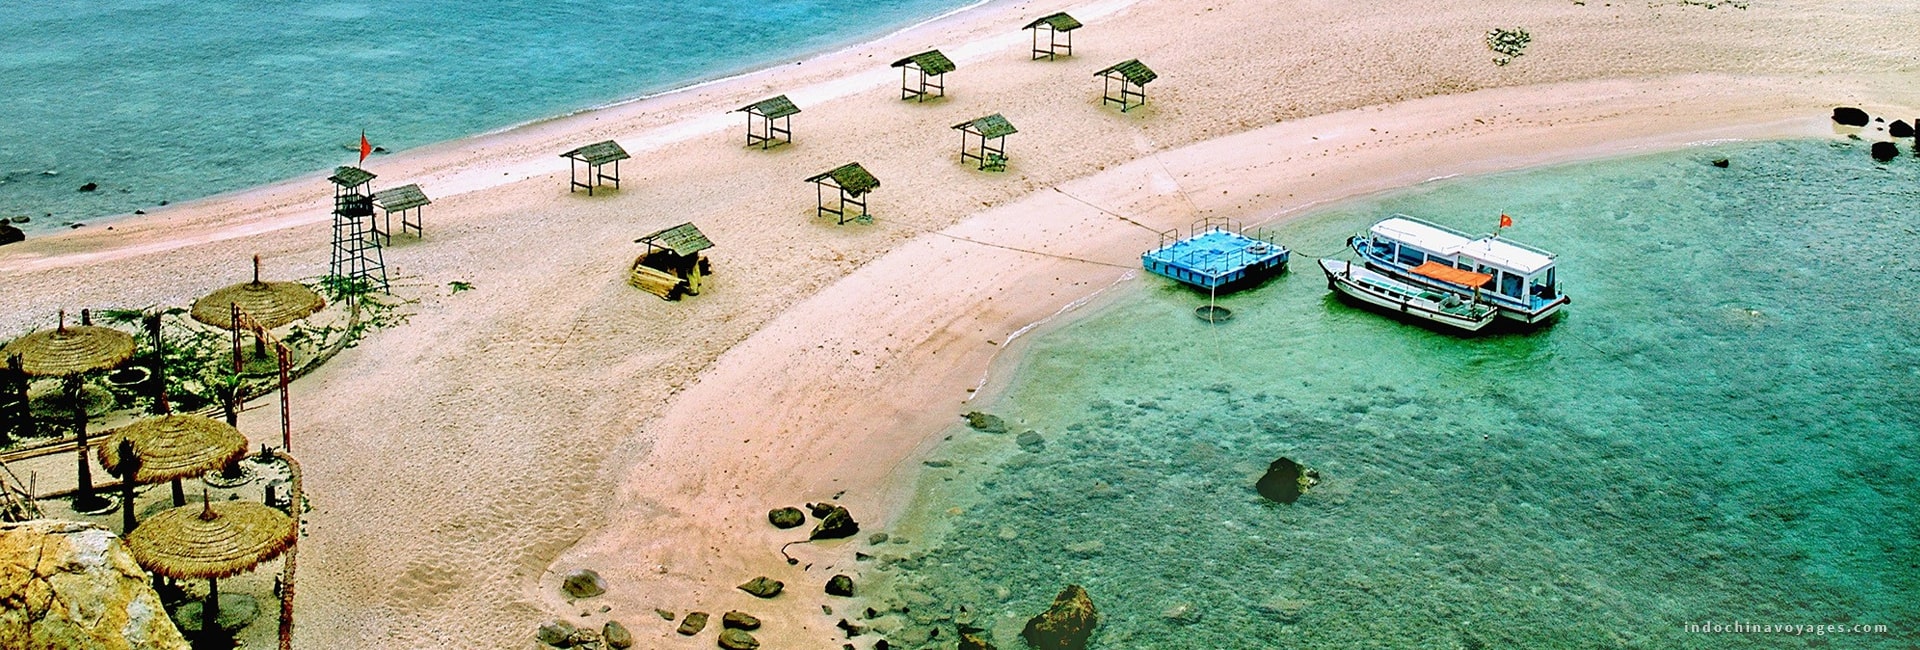 Nha Trang beaches are the star of the city
